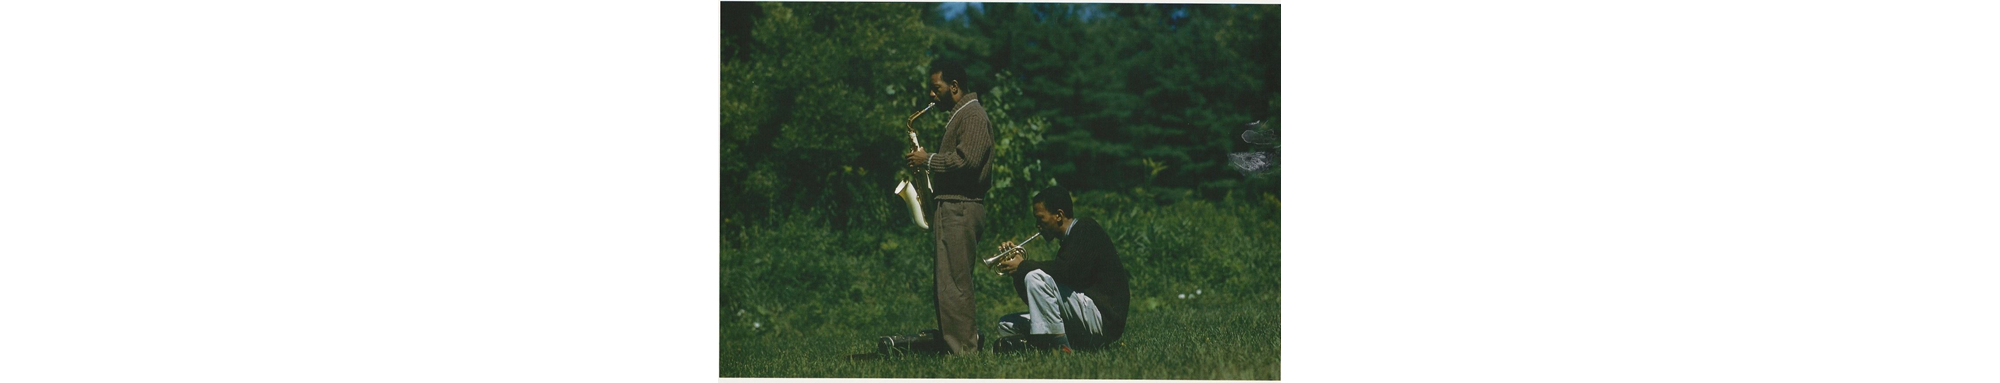 Photograph of Ornette Coleman (left) and Don Cherry (right), by Lee Friedlander 